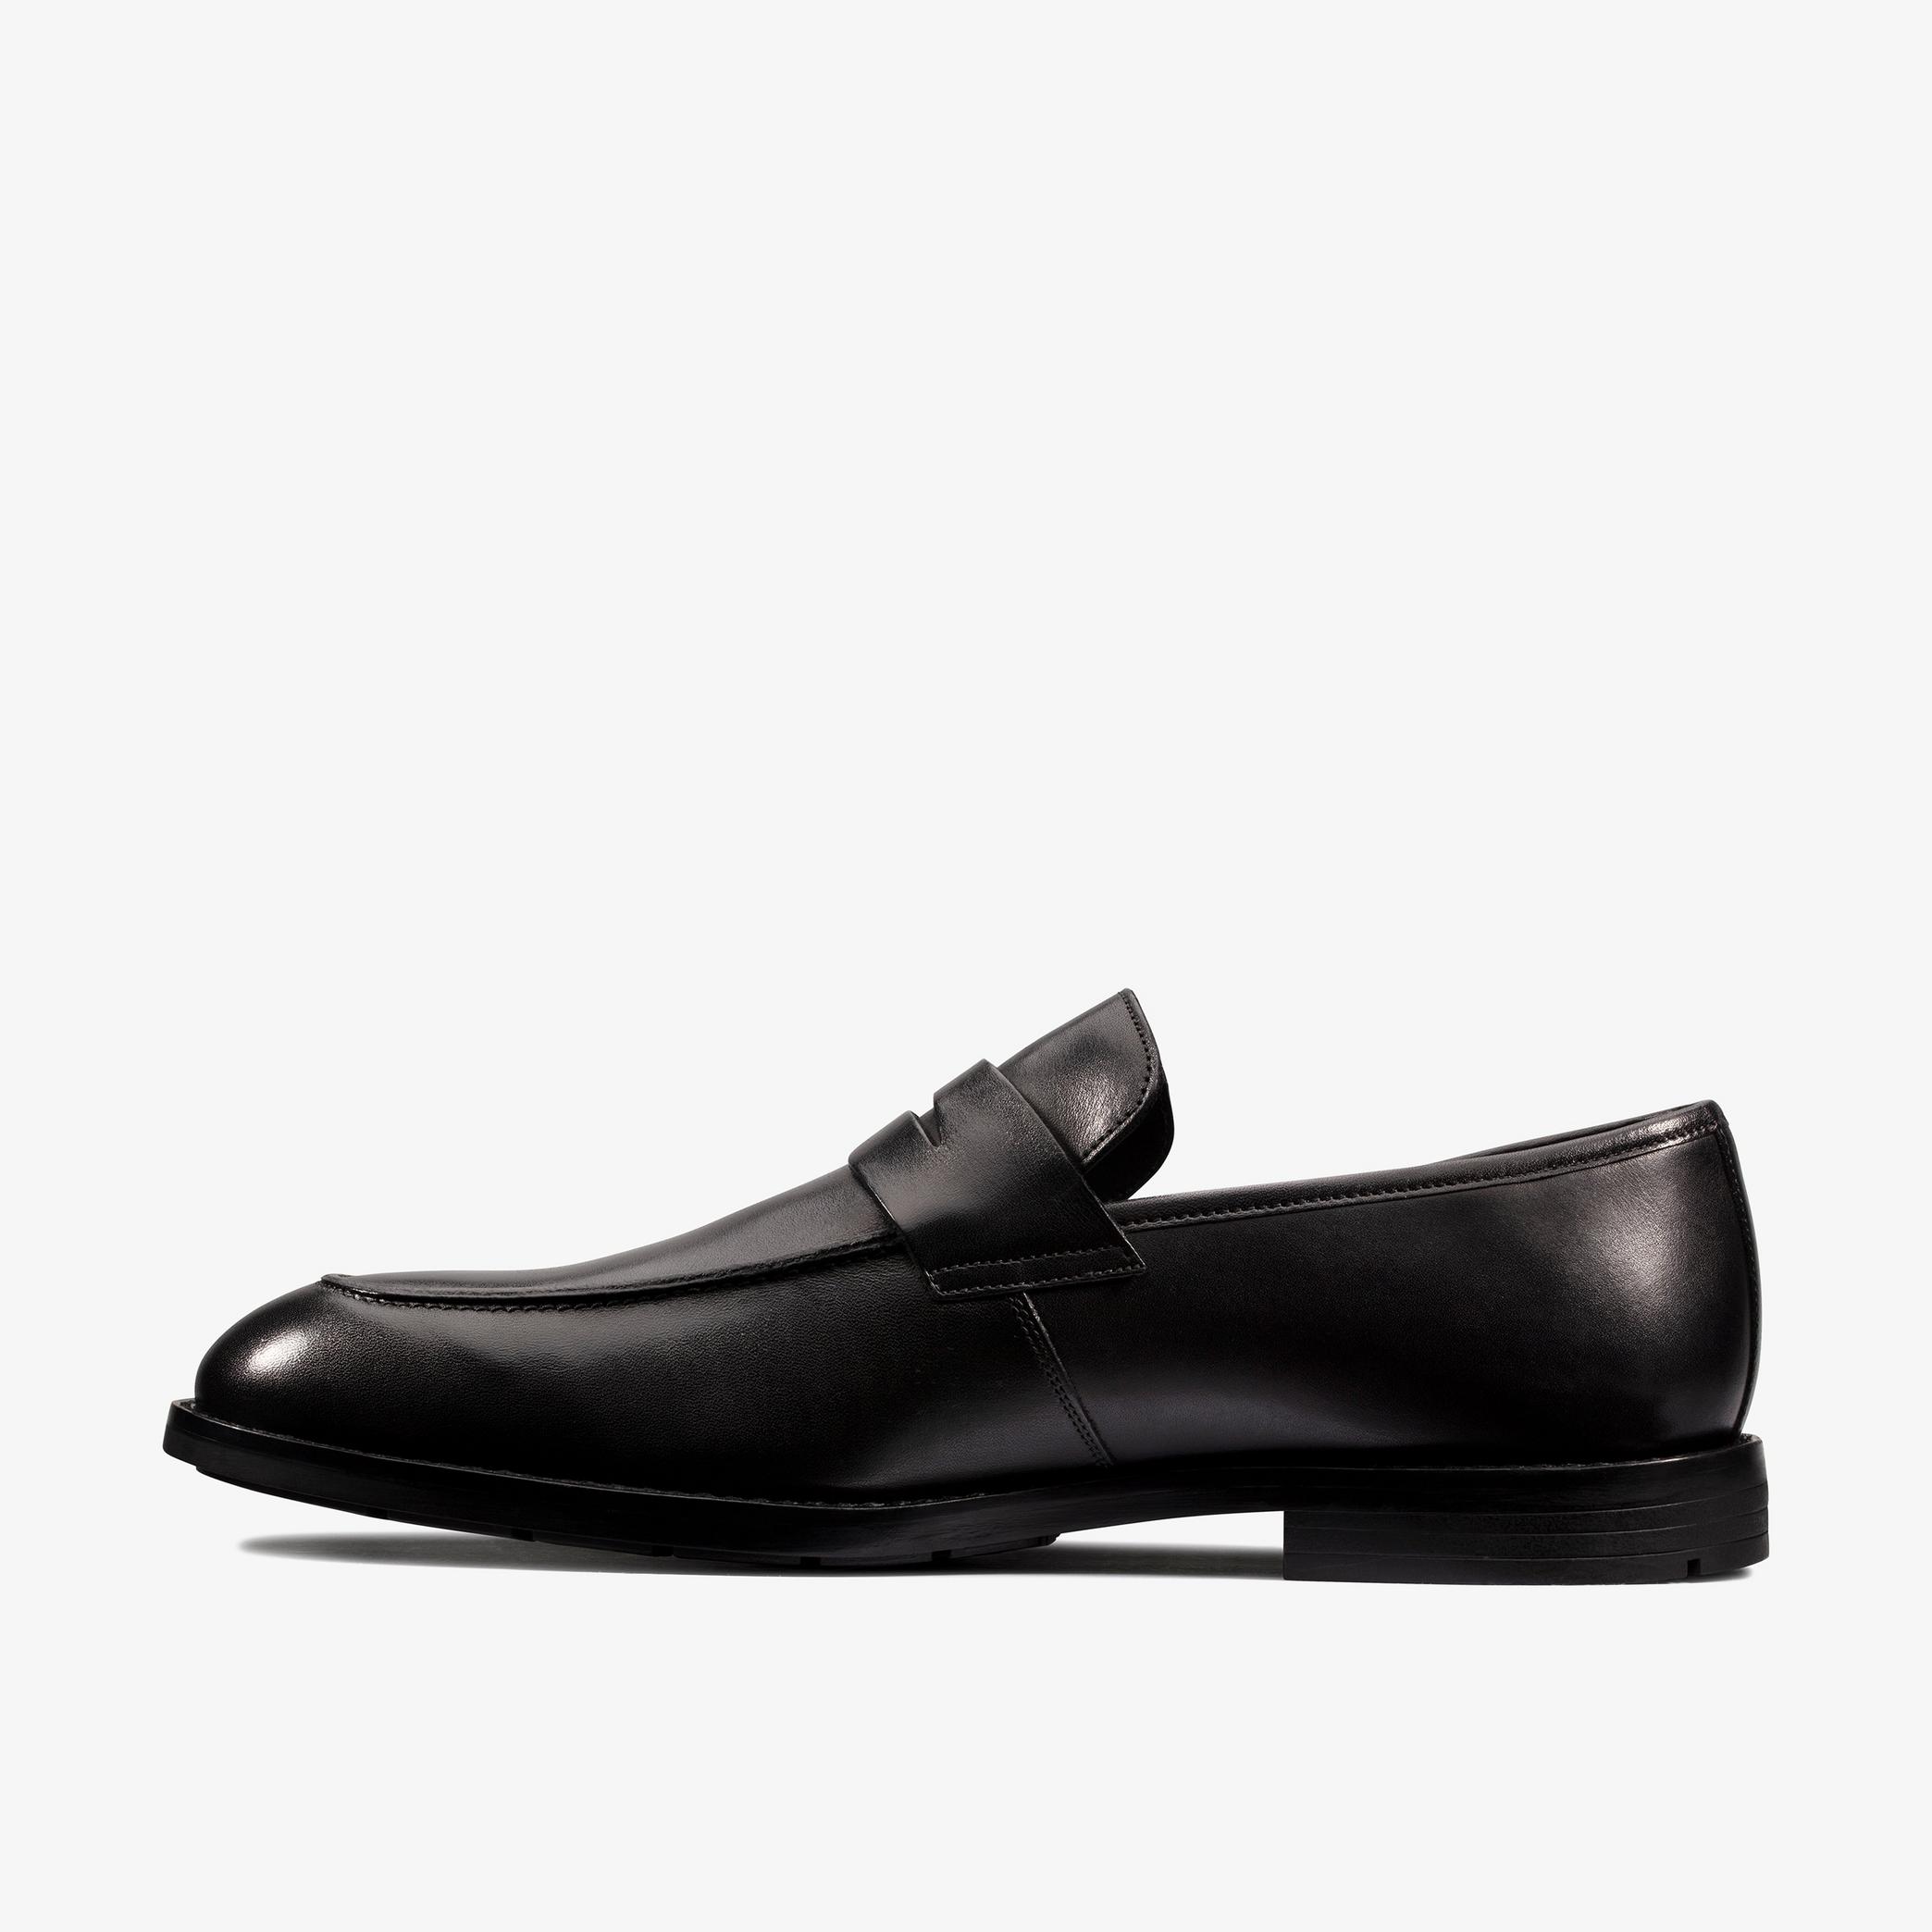 Ronnie Step Black Leather Loafers, view 2 of 6